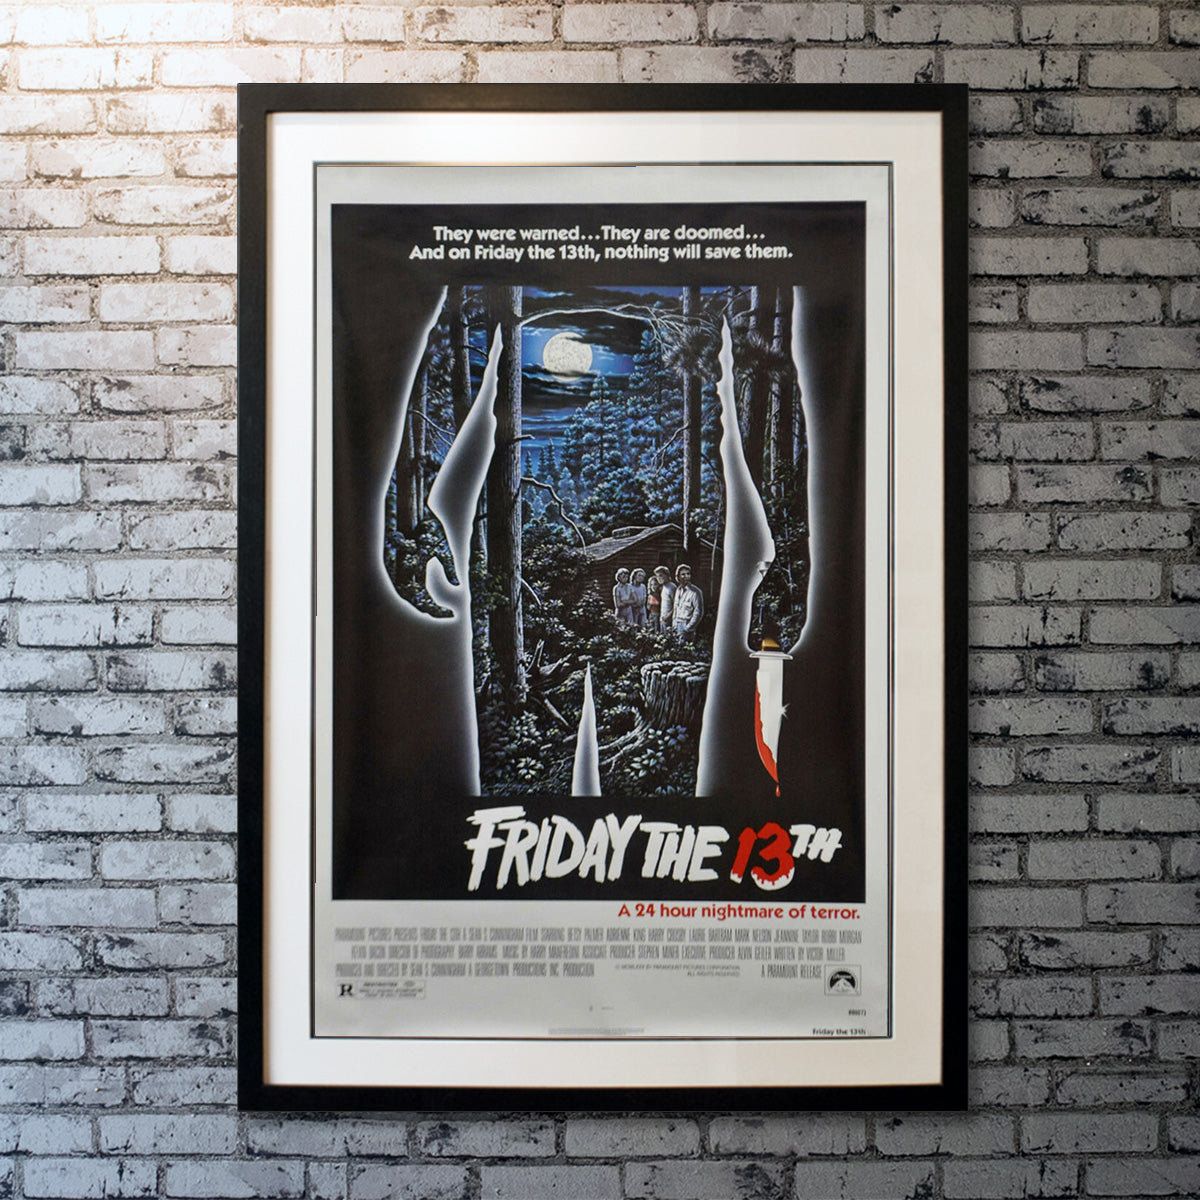 MOVIE POSTER, FRIDAY THE 13TH, 1980 Stock Photo - Alamy